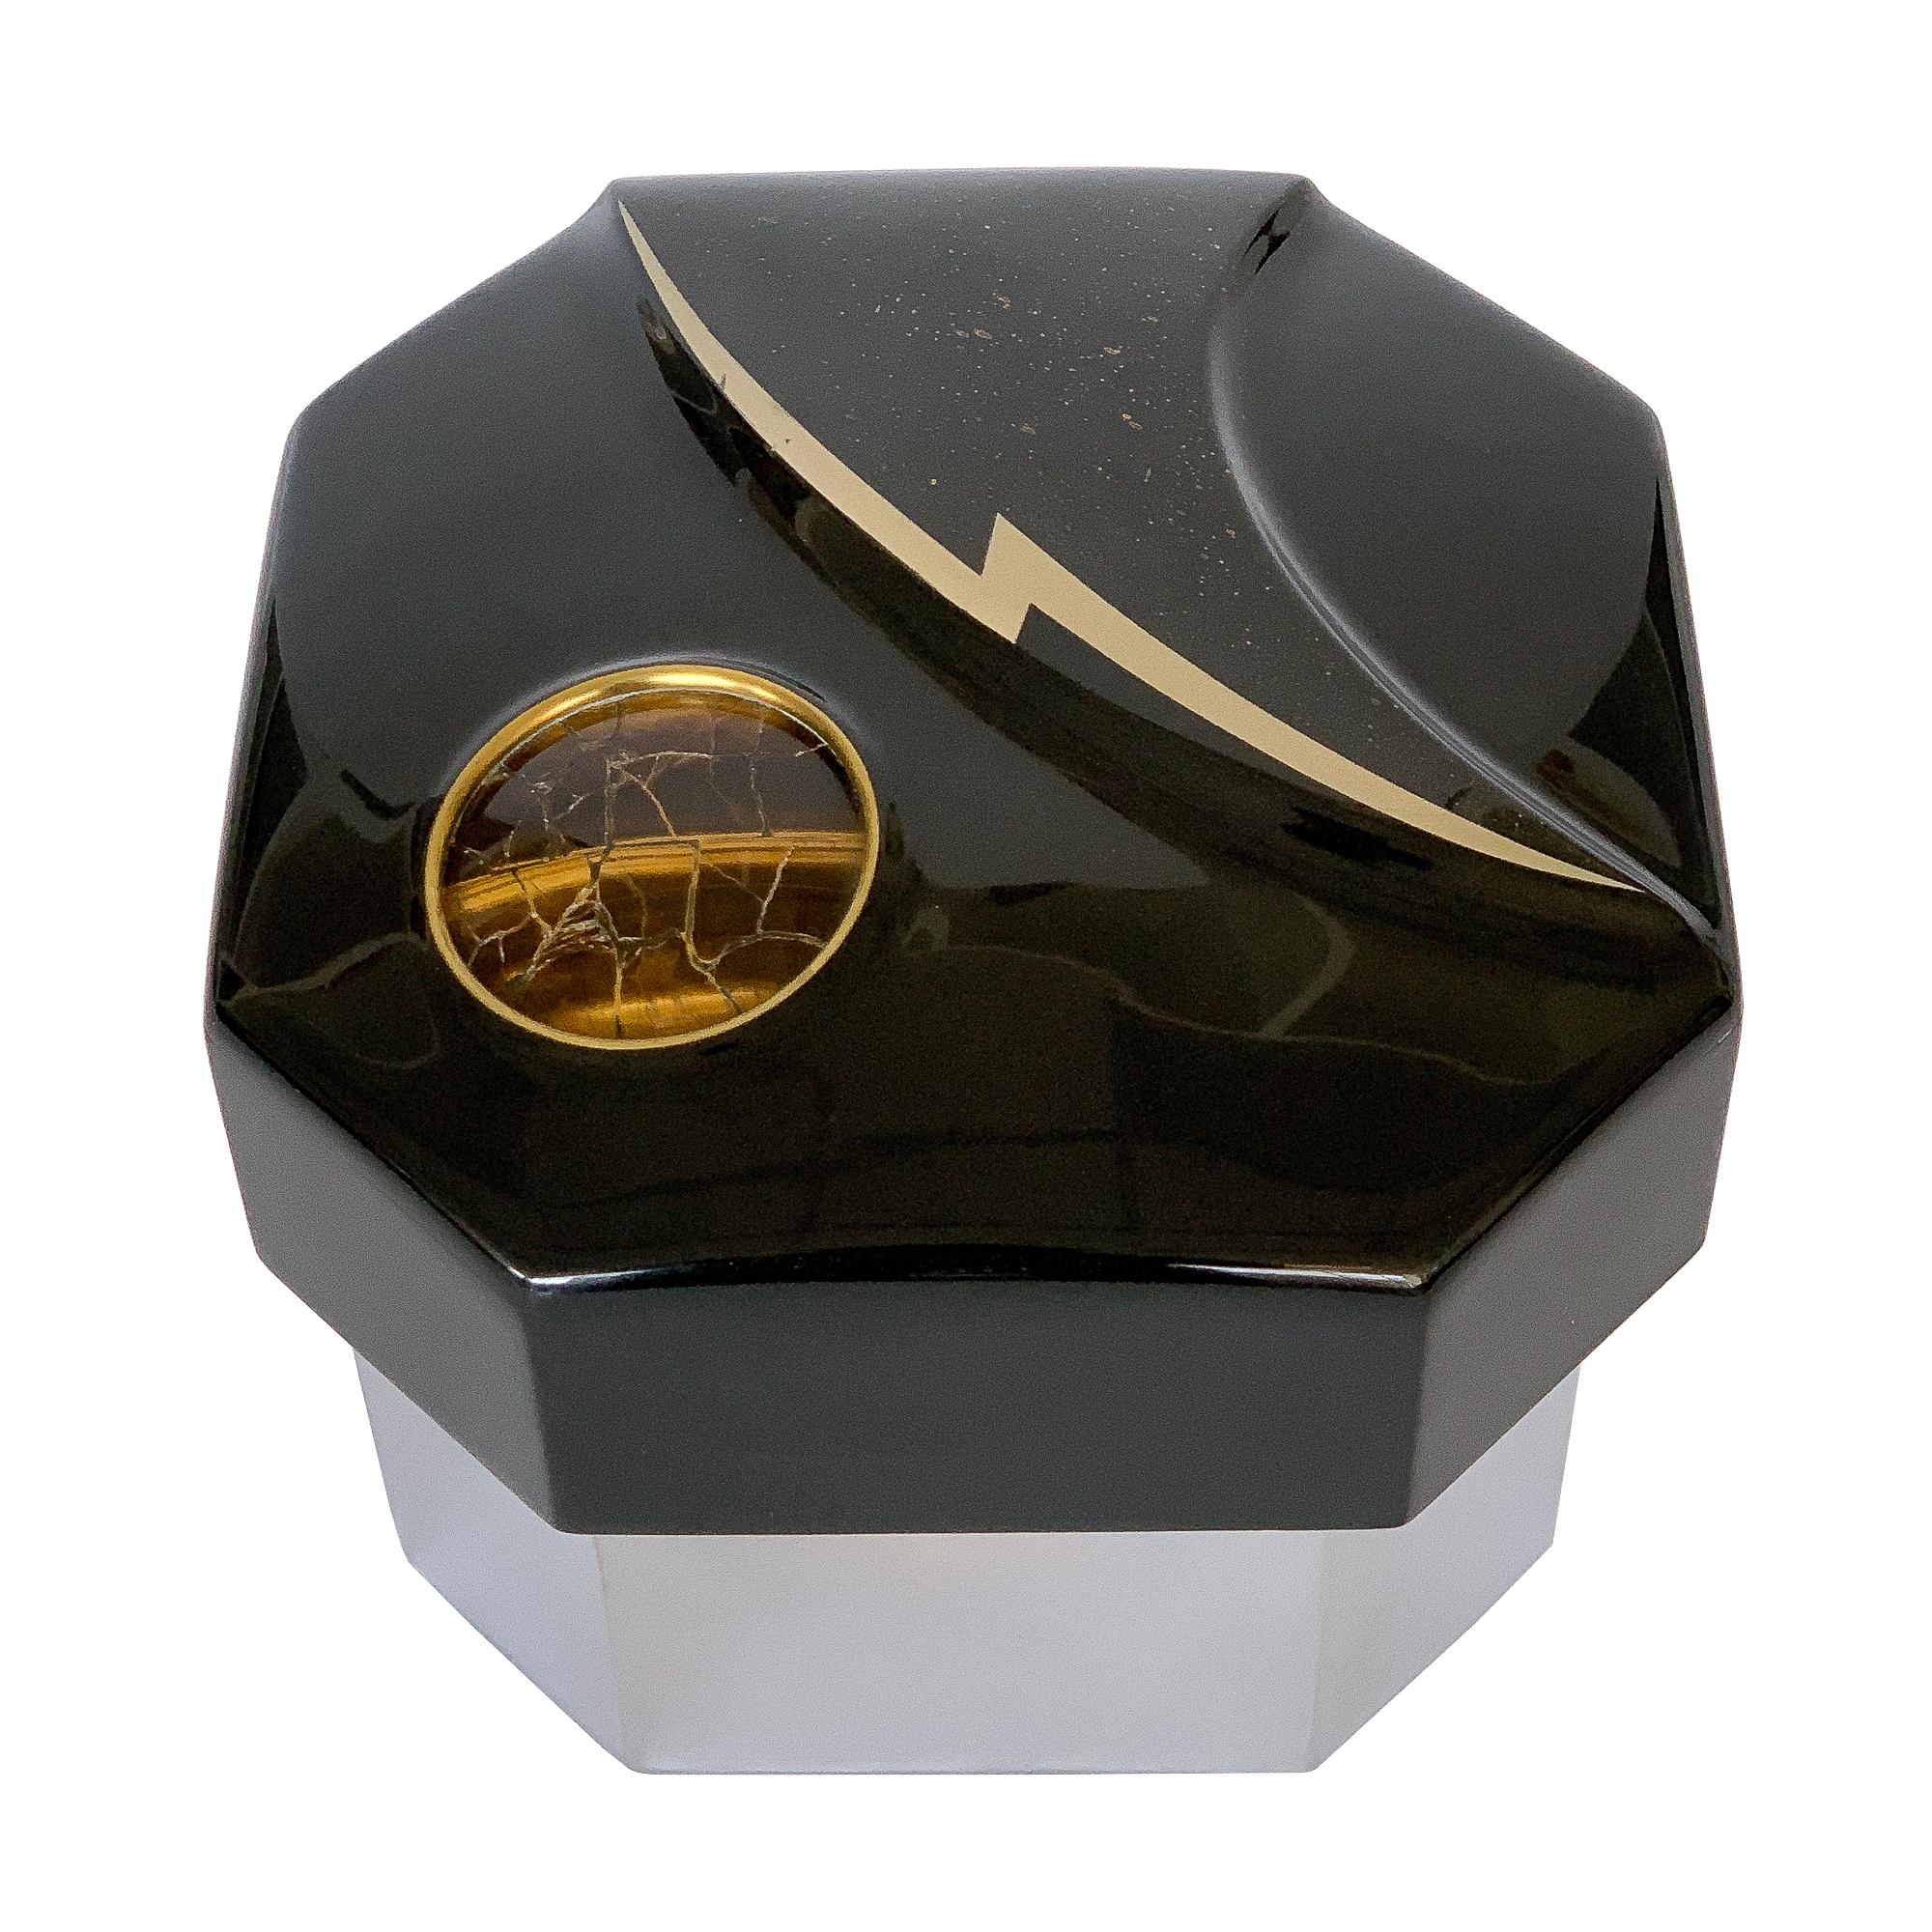 Jonson & Marcius Black Lacquered and Chrome Box Inlaid with Tiger's Eye